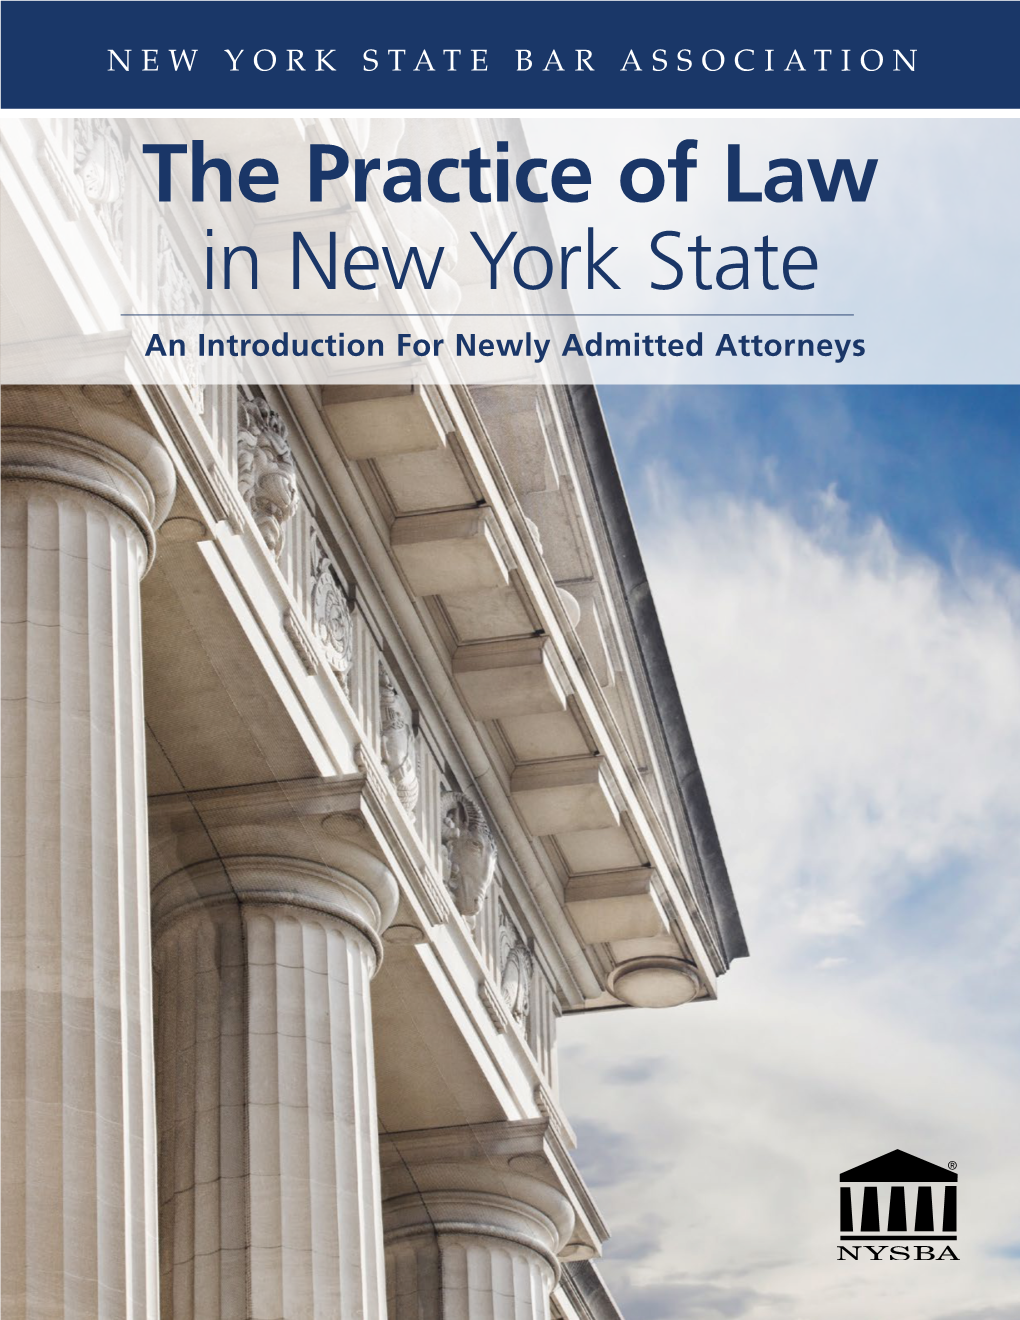 The Practice of Law in New York State an Introduction for Newly Admitted Attorneys the Practice of Law in New York State: an Introduction for Newly Admitted Attorneys